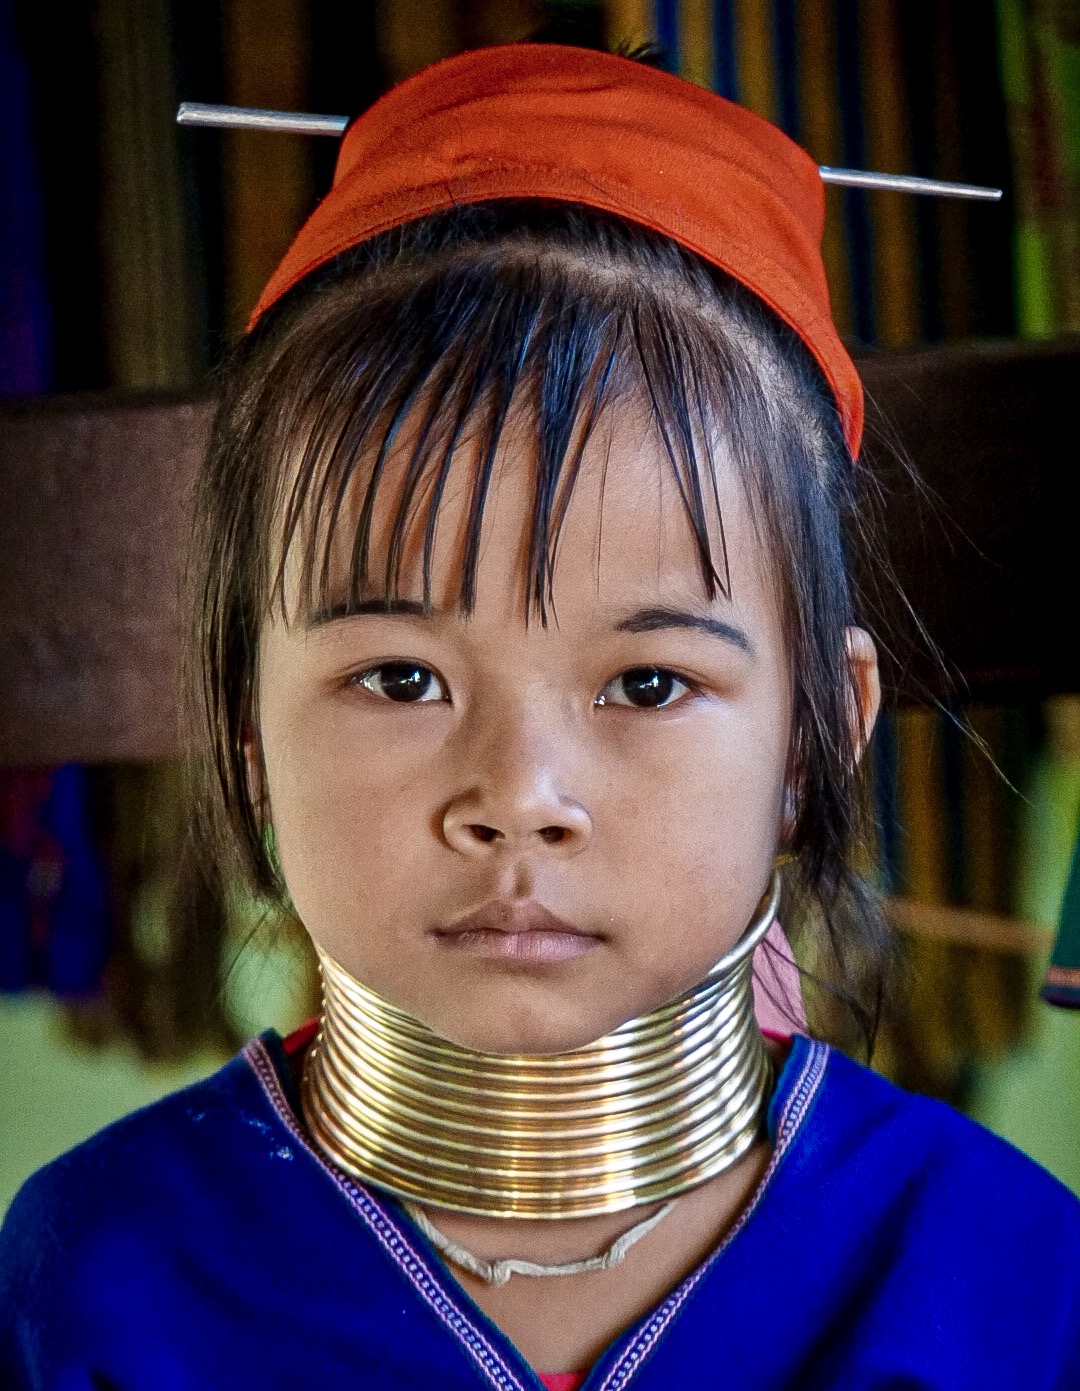 Padaung Long Neck Girl:
Padaung is a Shan term for the subgroup, Kayan Lahwi in which women wear this brass neck coils as part of their tradition. 